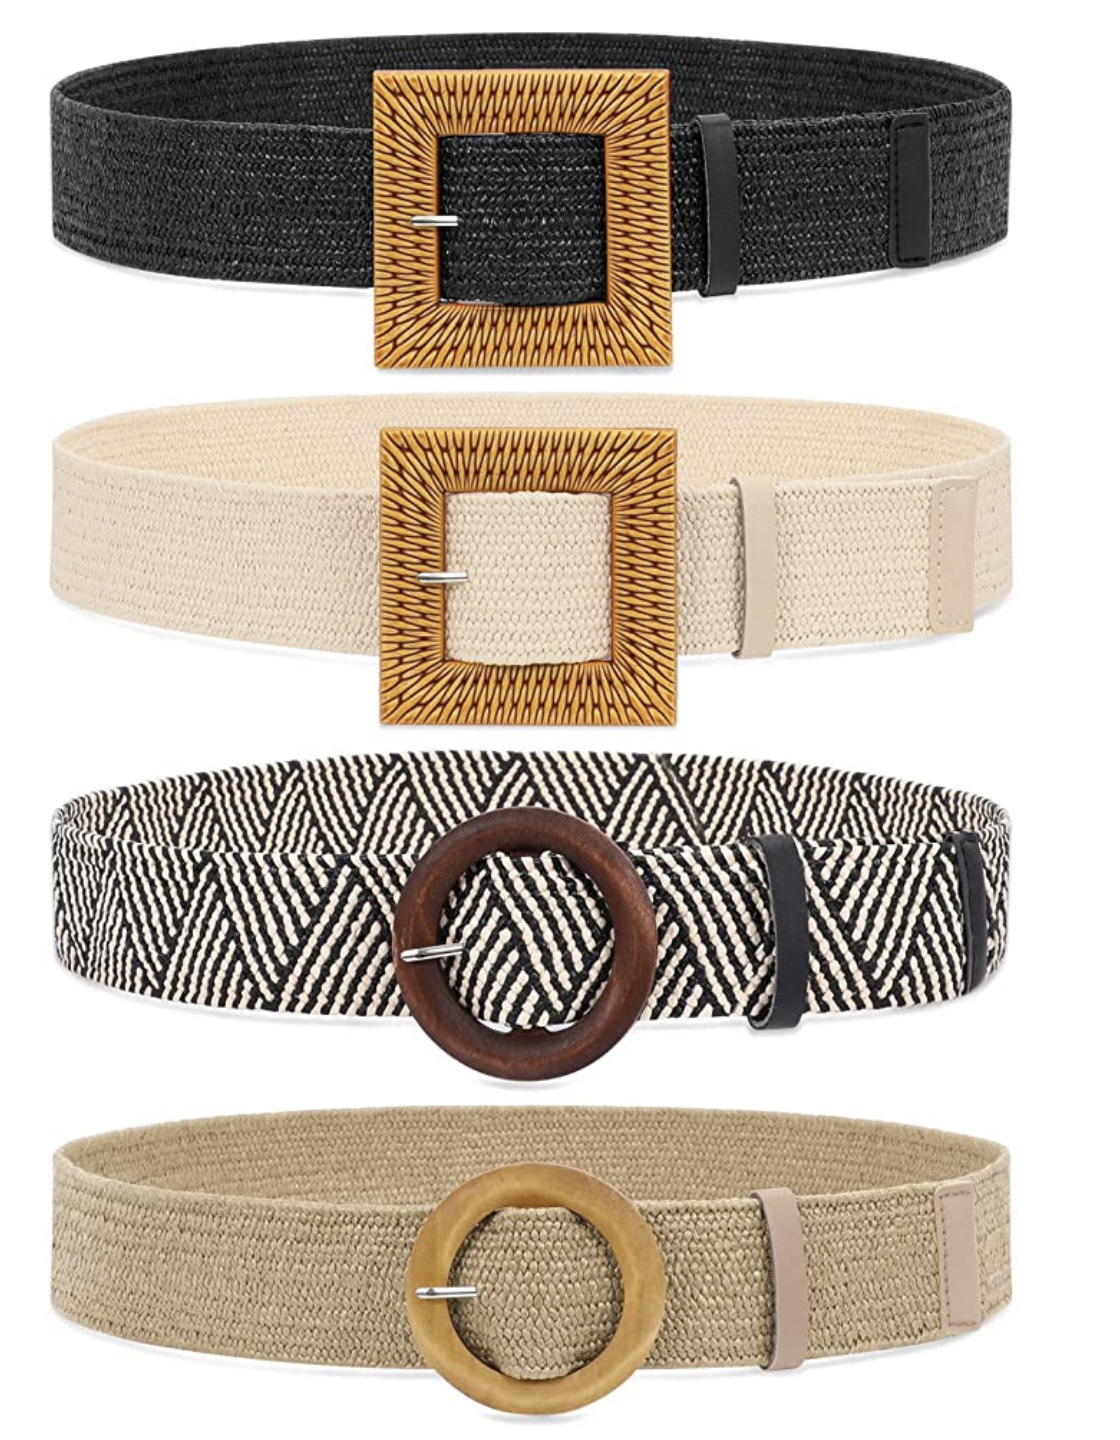 Belts for summer, this weeks Chit Chat Chic